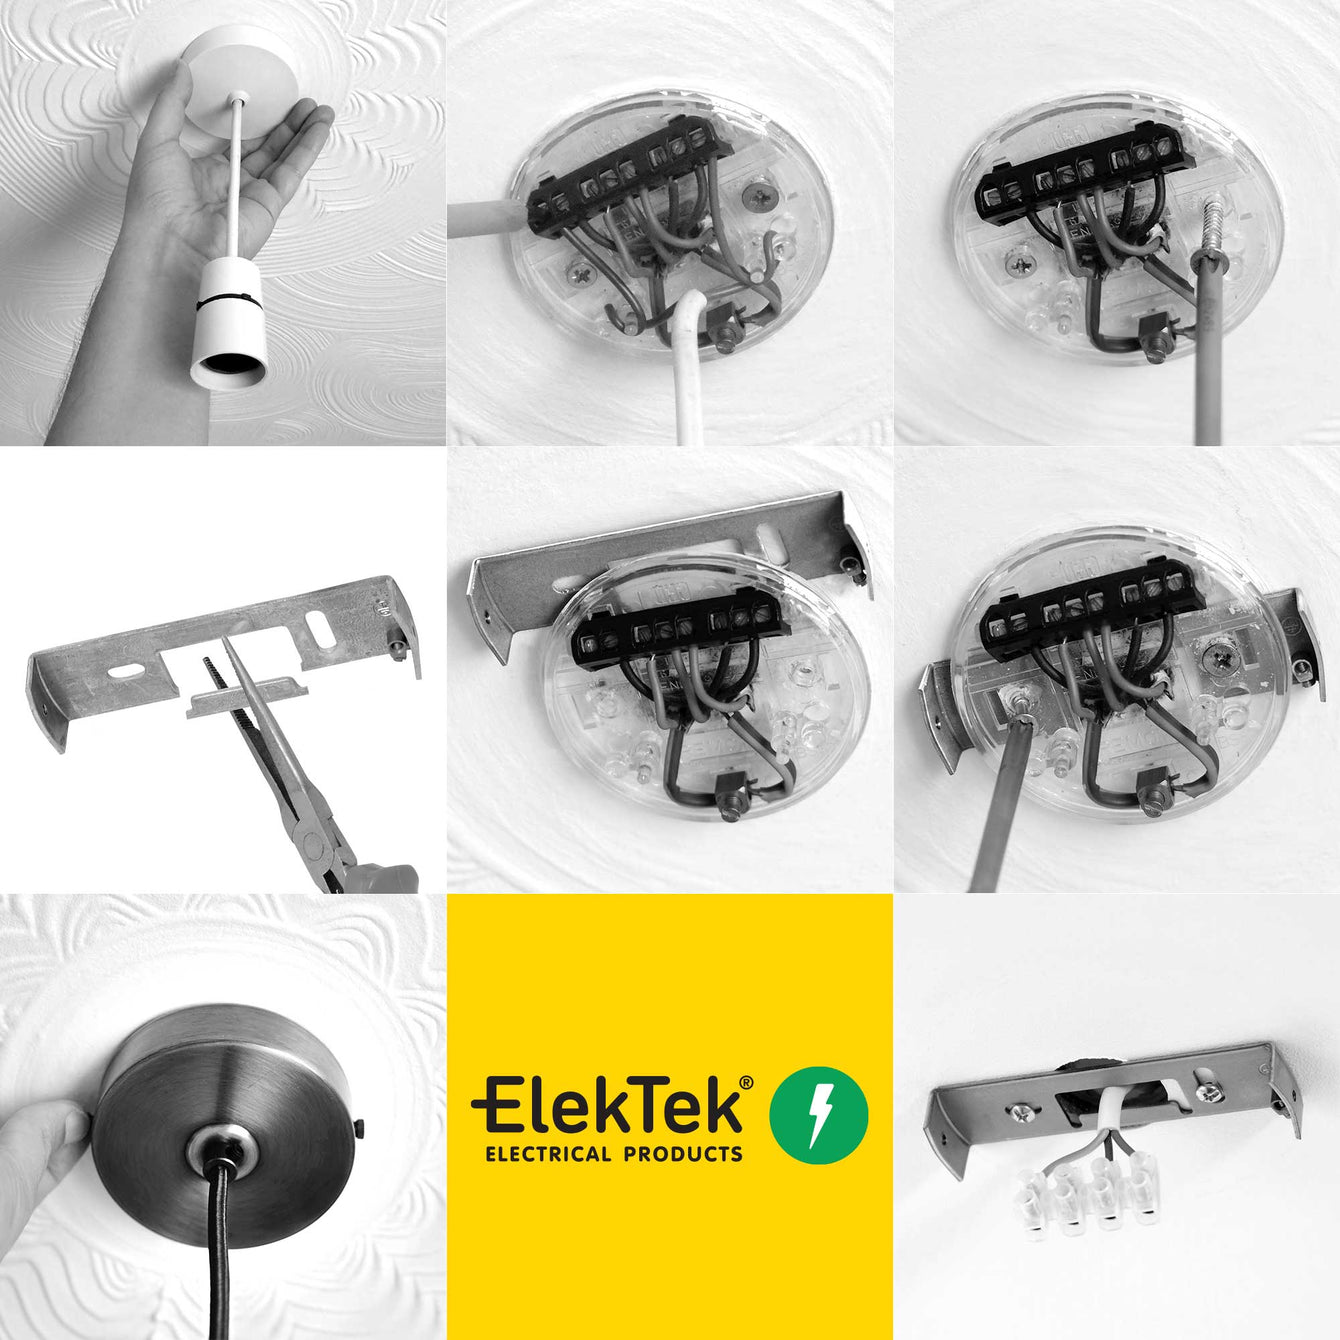 ElekTek 100mm Diameter Flat Top Ceiling Rose with Strap Bracket and Hook Metallic Finishes Powder Coated Colours Fusion Bronze